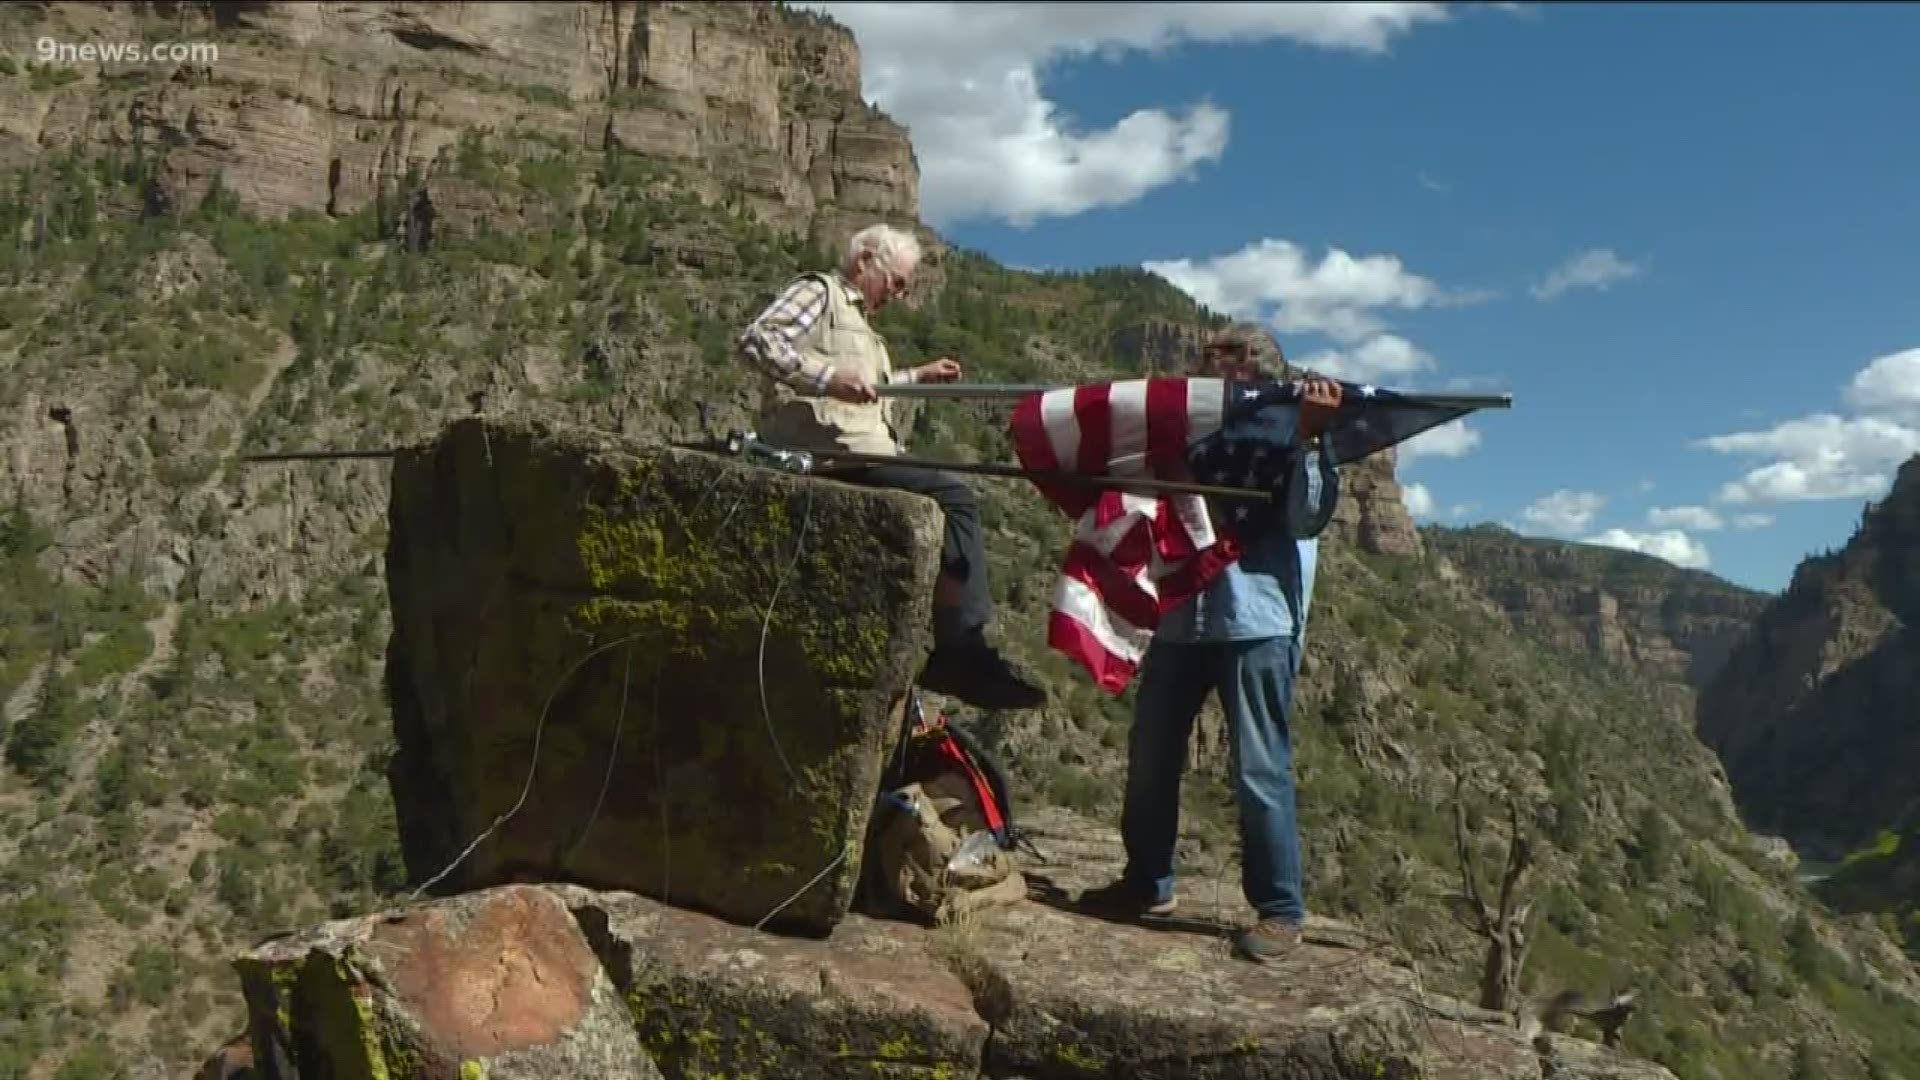 The flag staked high above Glenwood Canyon has become sort of a legend. Don't believe the rumors about the sheepherder, the kayaker, or the dentist in Aspen.